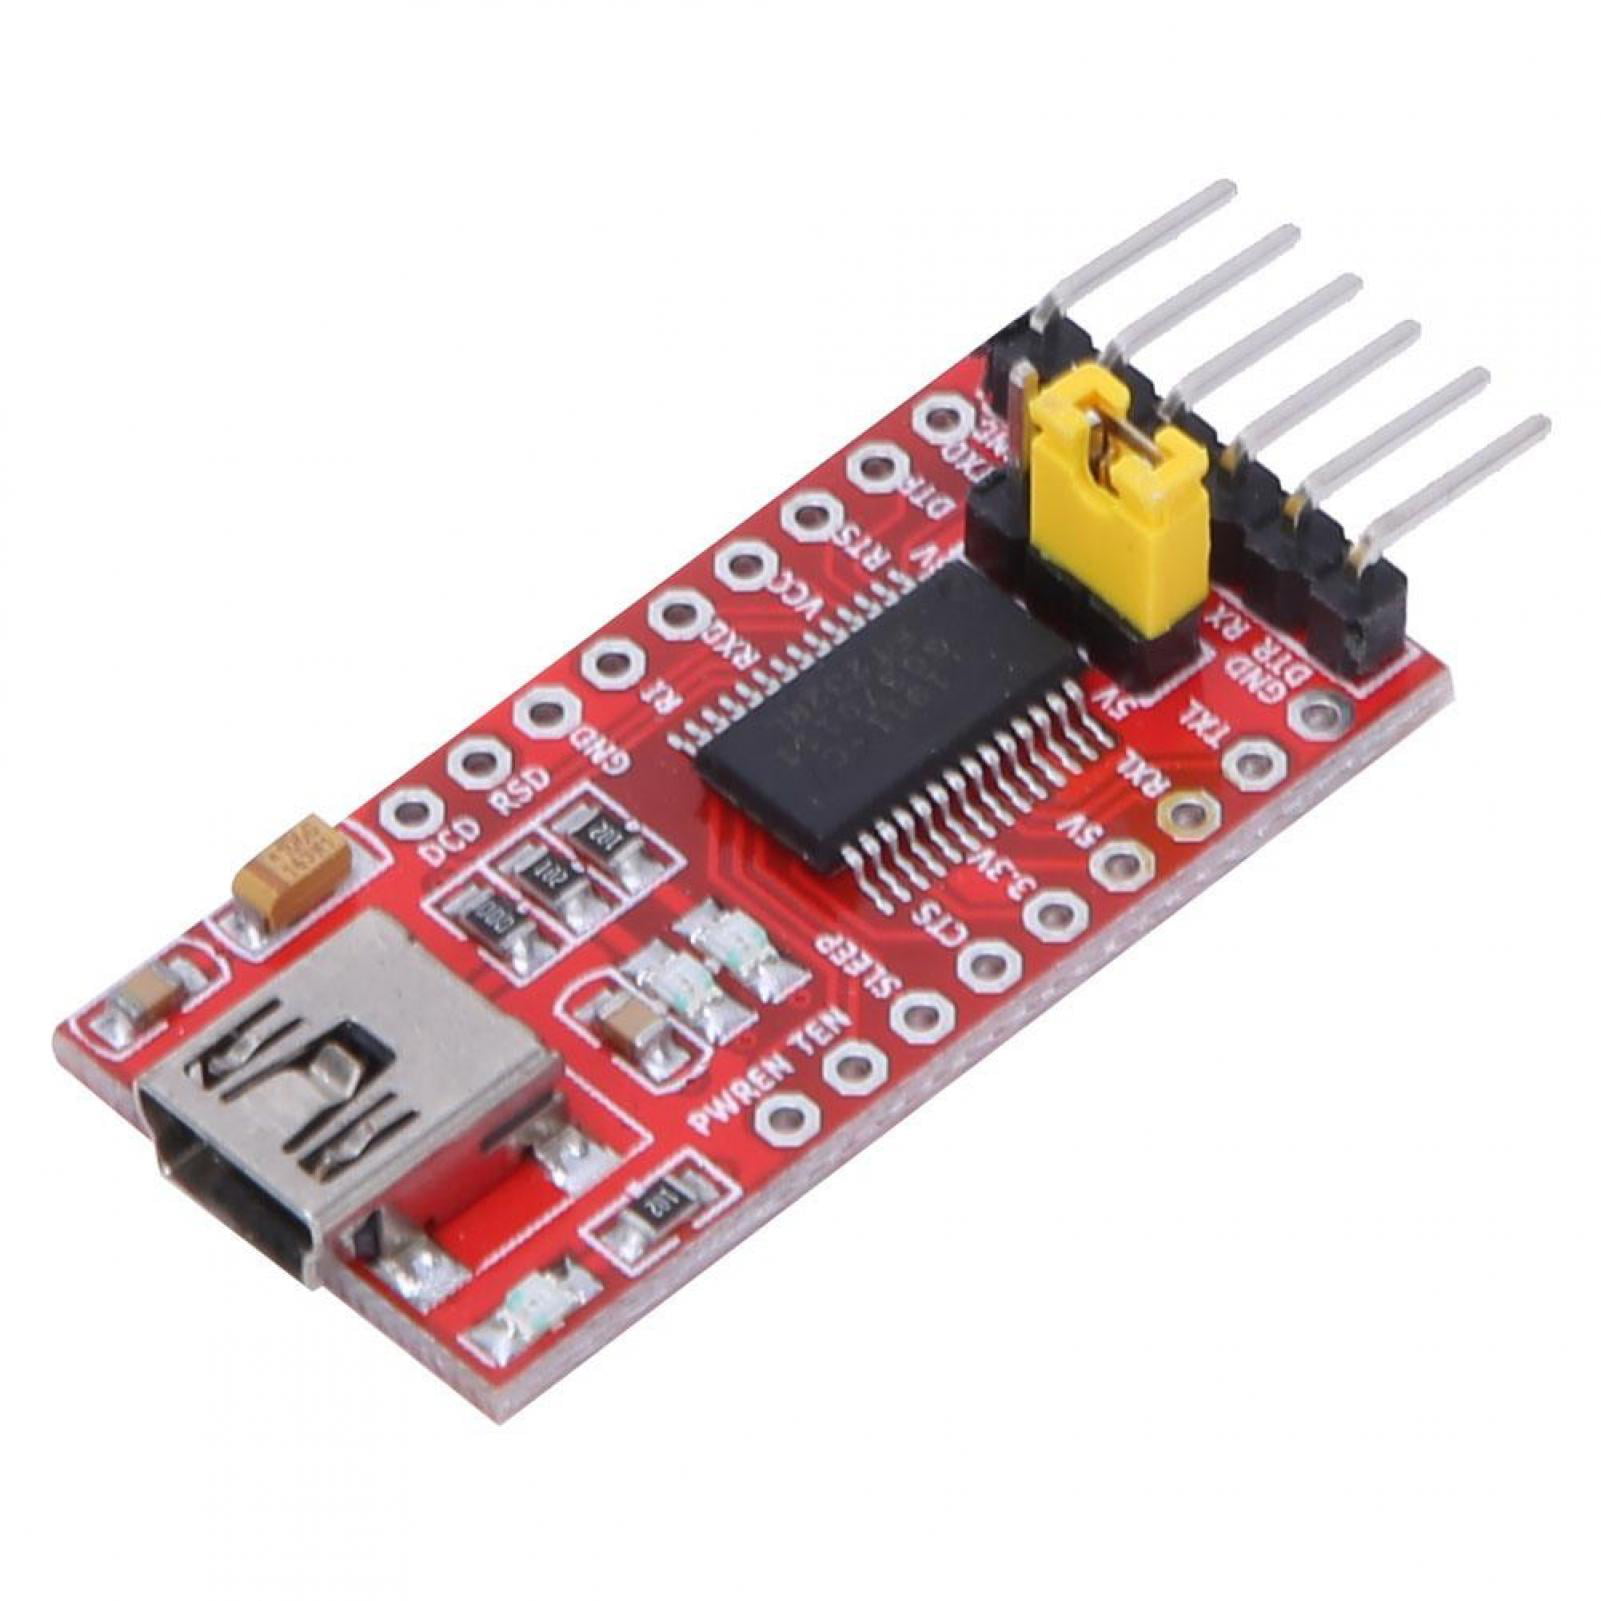 Details about   FTDI FT232RL USB to TTL Serial Converter Adapter Module 5V 3.3V For Arduino